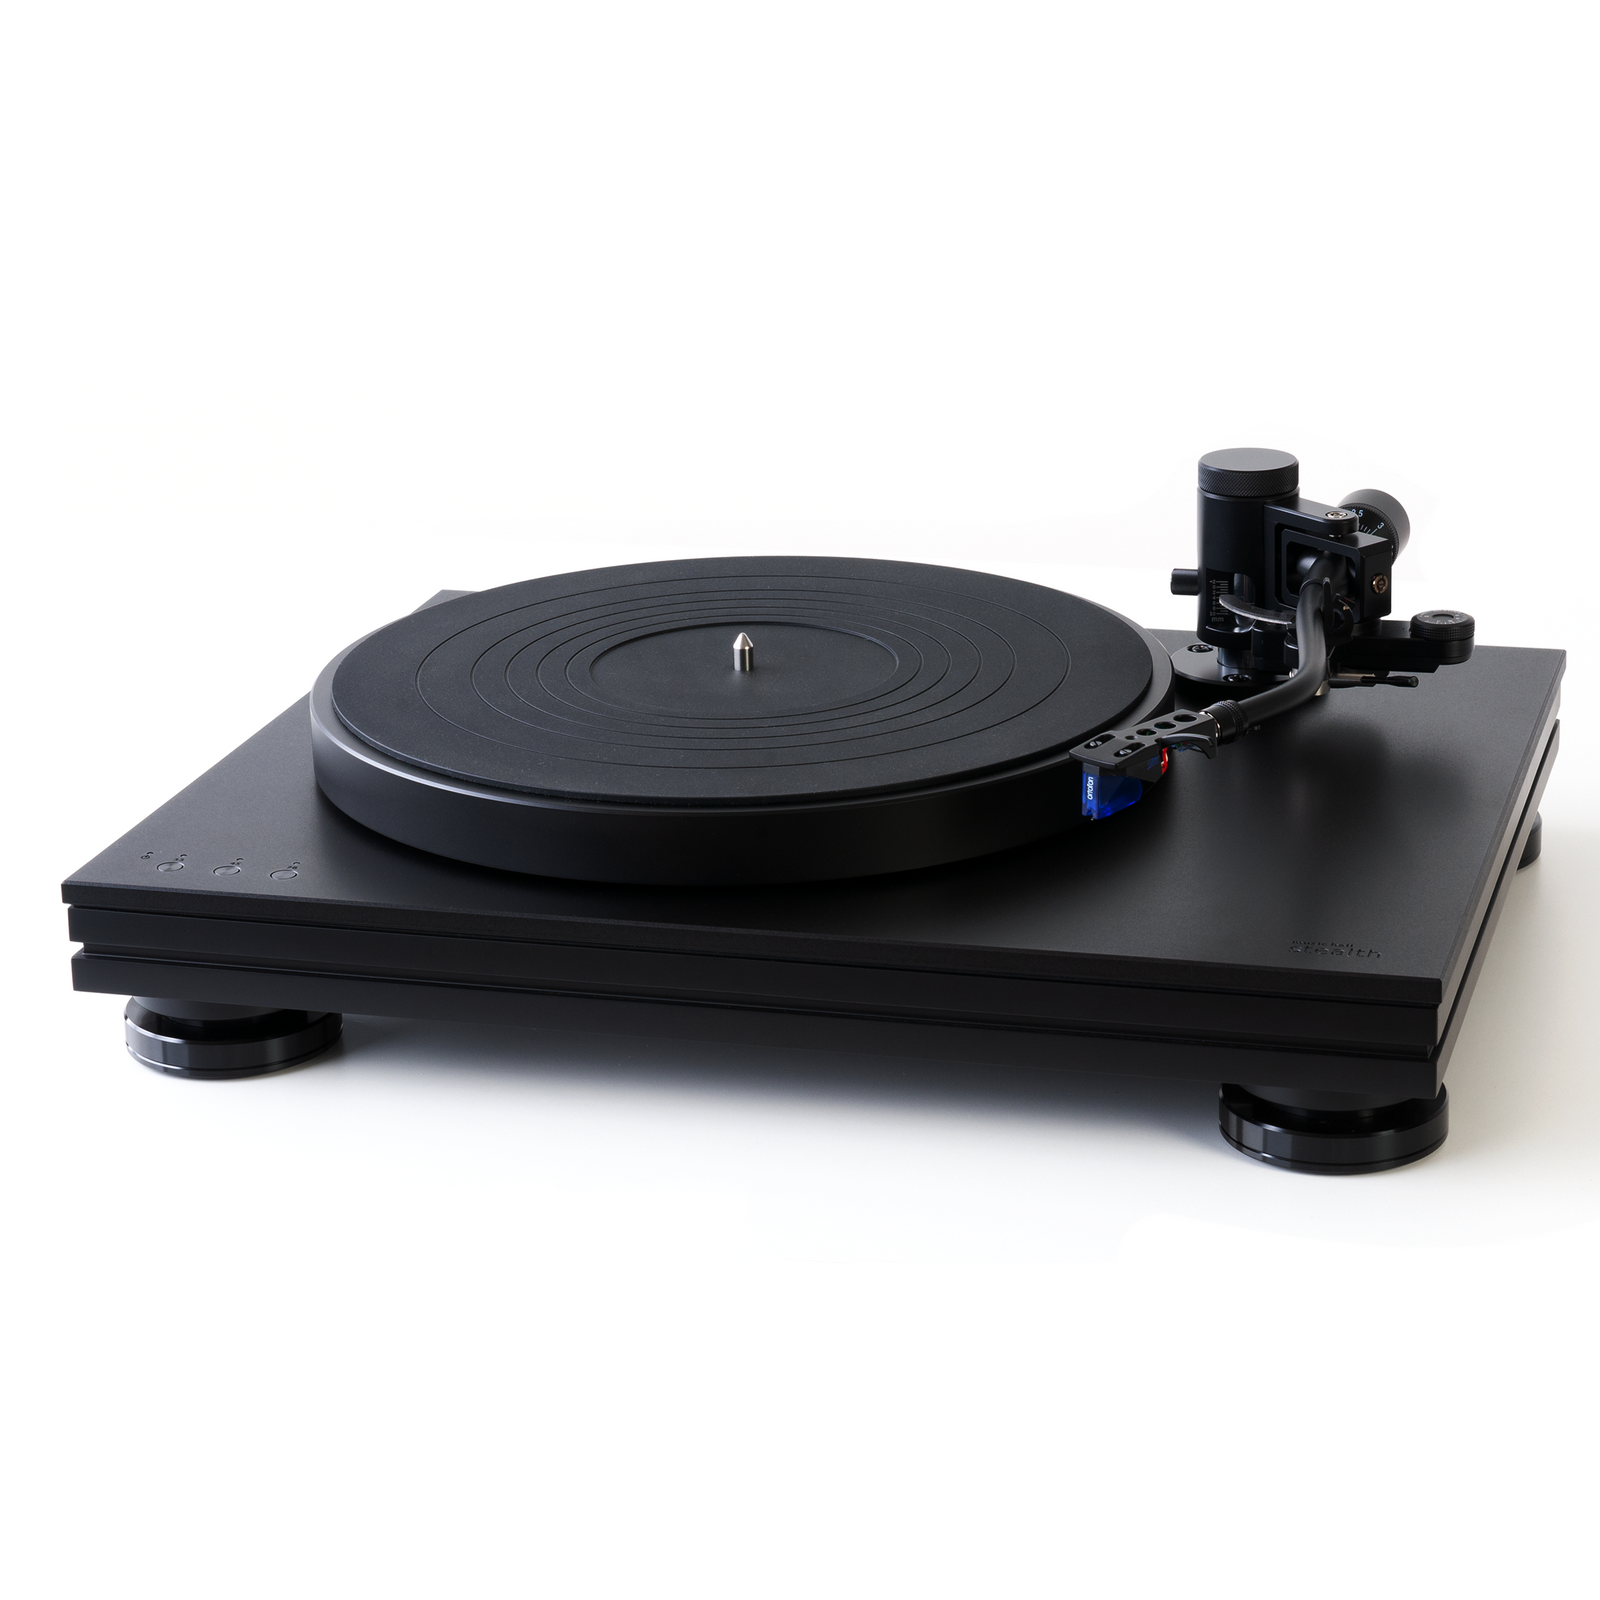 Product Highlights: 3-speed direct drive turntable with touch-activated speed controls Brushless, low-torque motor automatically stops running at the end of a record Heavy, multi-layer chassis and height-adjustable feet attenuate external vibrations S-shaped tonearm with VTA adjustment and detachable headshell Factory-mounted, precision-aligned Ortofon 2M Blue cartridge